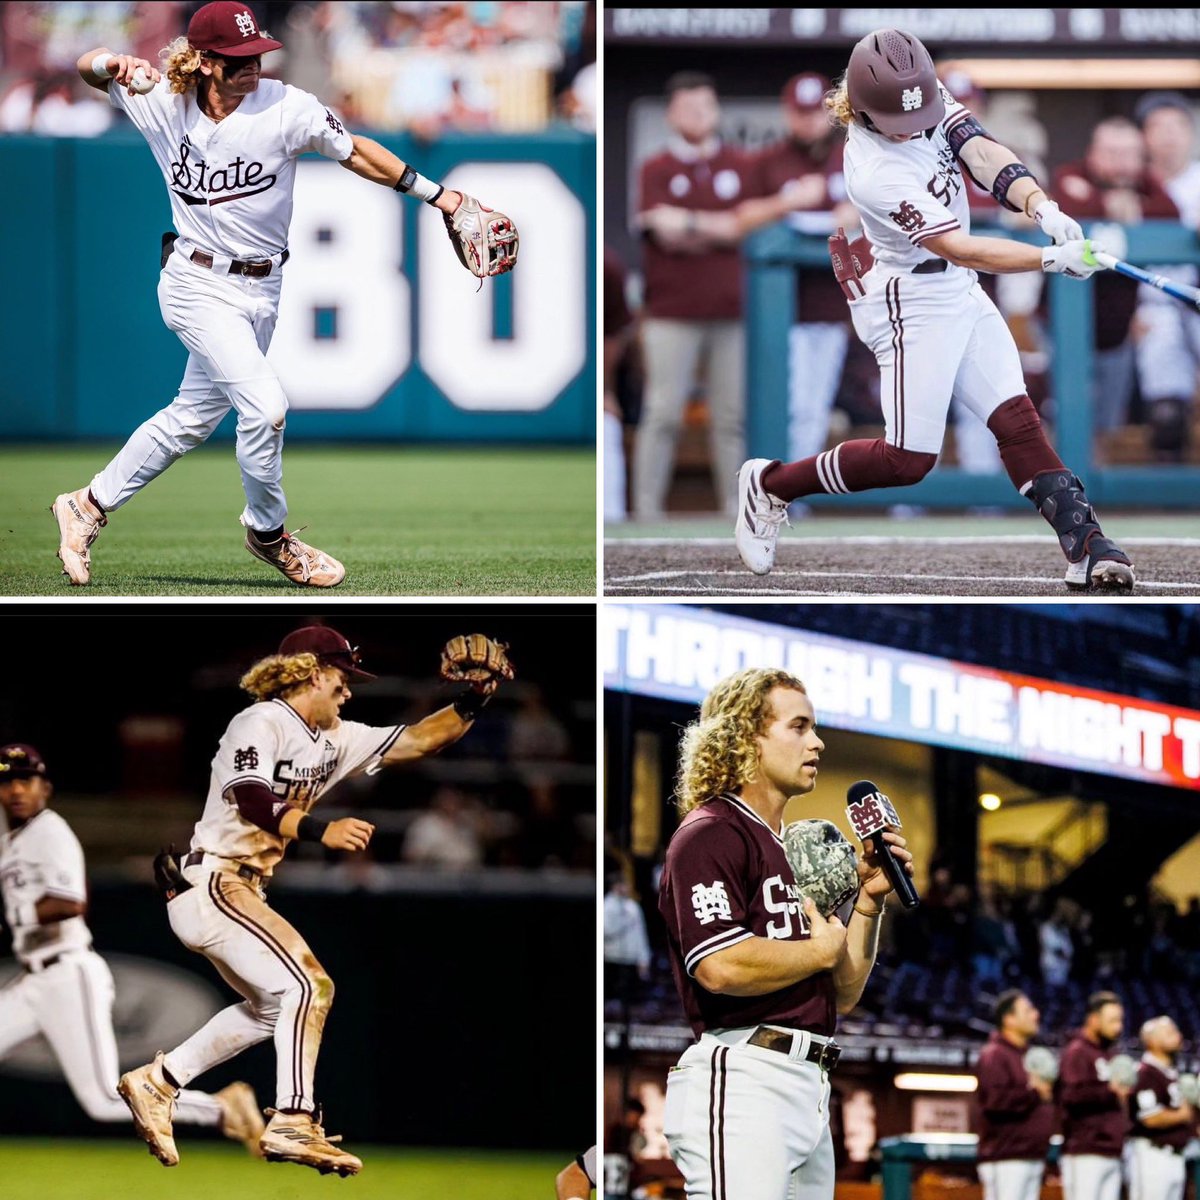 S10 IOTB @mershyyyyyy #HailState
We get his story #LLWS , big baseball family and why Miss St. We also discuss #Survivor and #SEC baseball #GrowTheGame @Carolynwmck @thebellsmith @DudyNobleField @SSN_HailState @MCBulloch @SSN_SEC 

youtu.be/h9Tm7VSaUk8?si…

spotify.link/Q5dYfrtdEJb